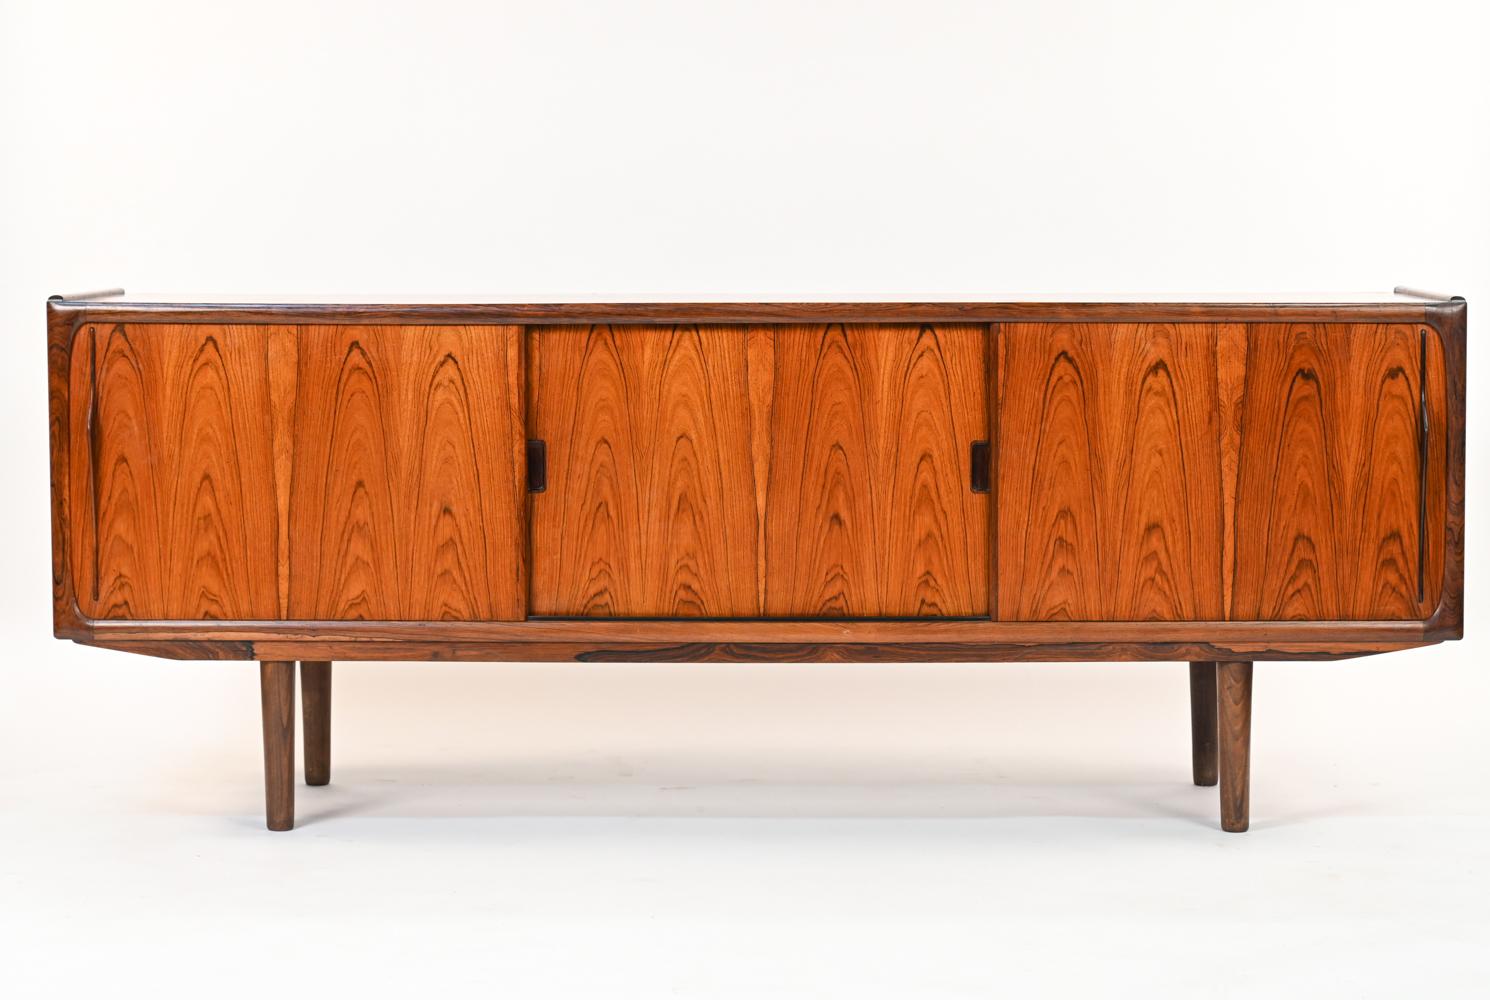 A handsome Danish mid-century sideboard in rosewood book-matched veneer designed by Erik Wørts for Møbelfarikken Norden. Featuring mahogany shelves to interior with stunning grain. With manufacturer's label to back.